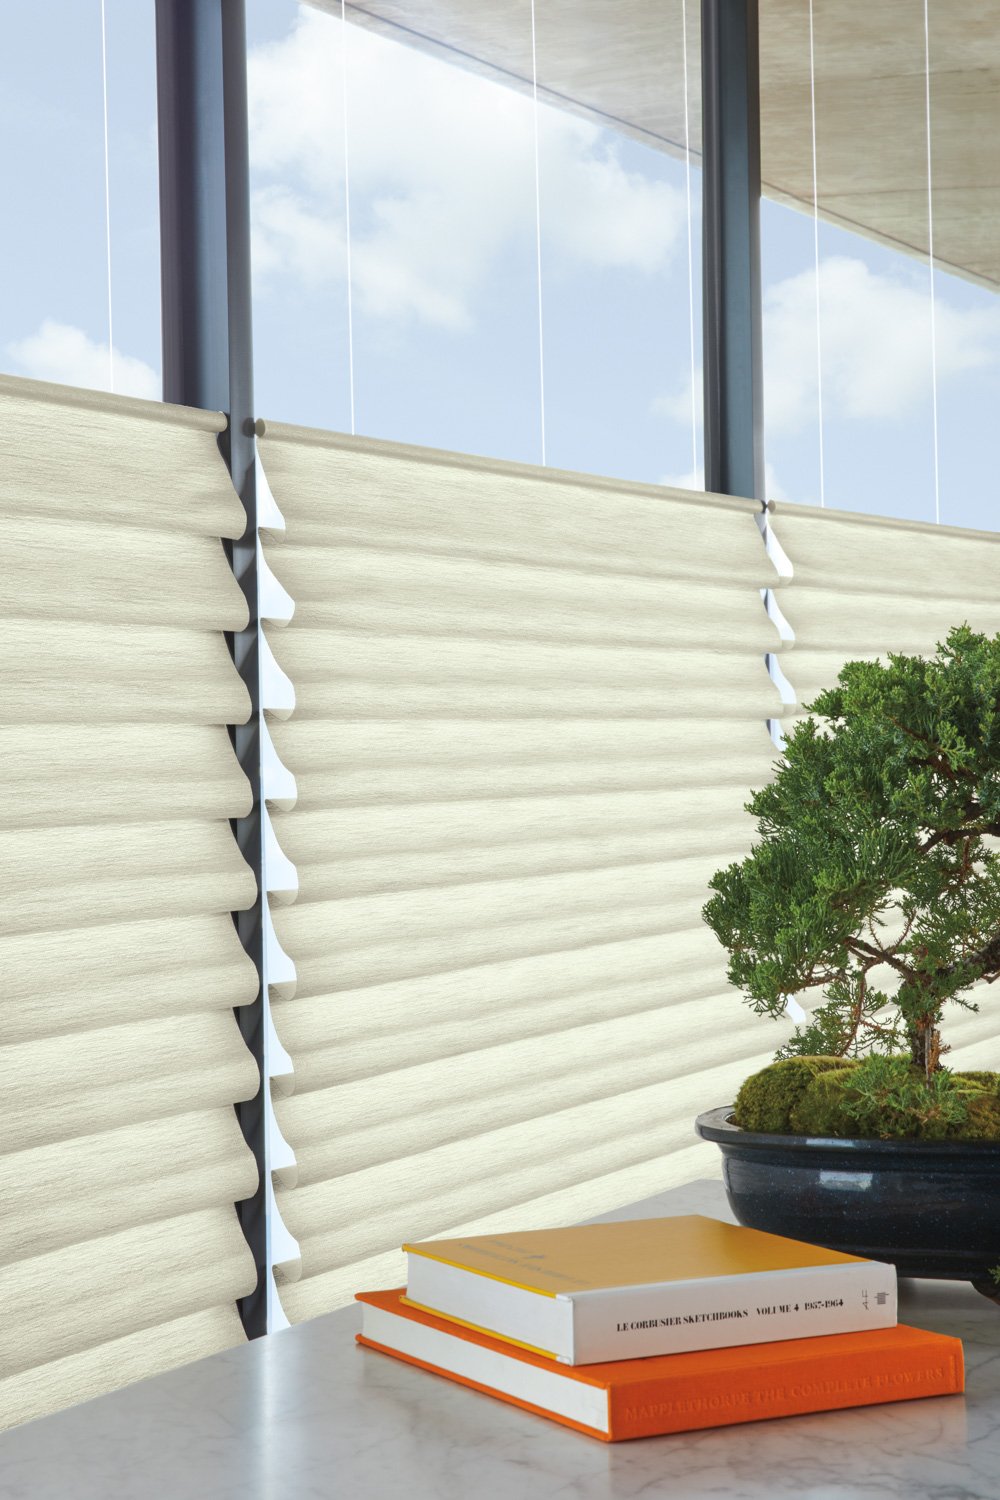 A small tree sits in front of a window with shades. The image showcases Hunter Douglas Vignette® Modern Roman Shades.